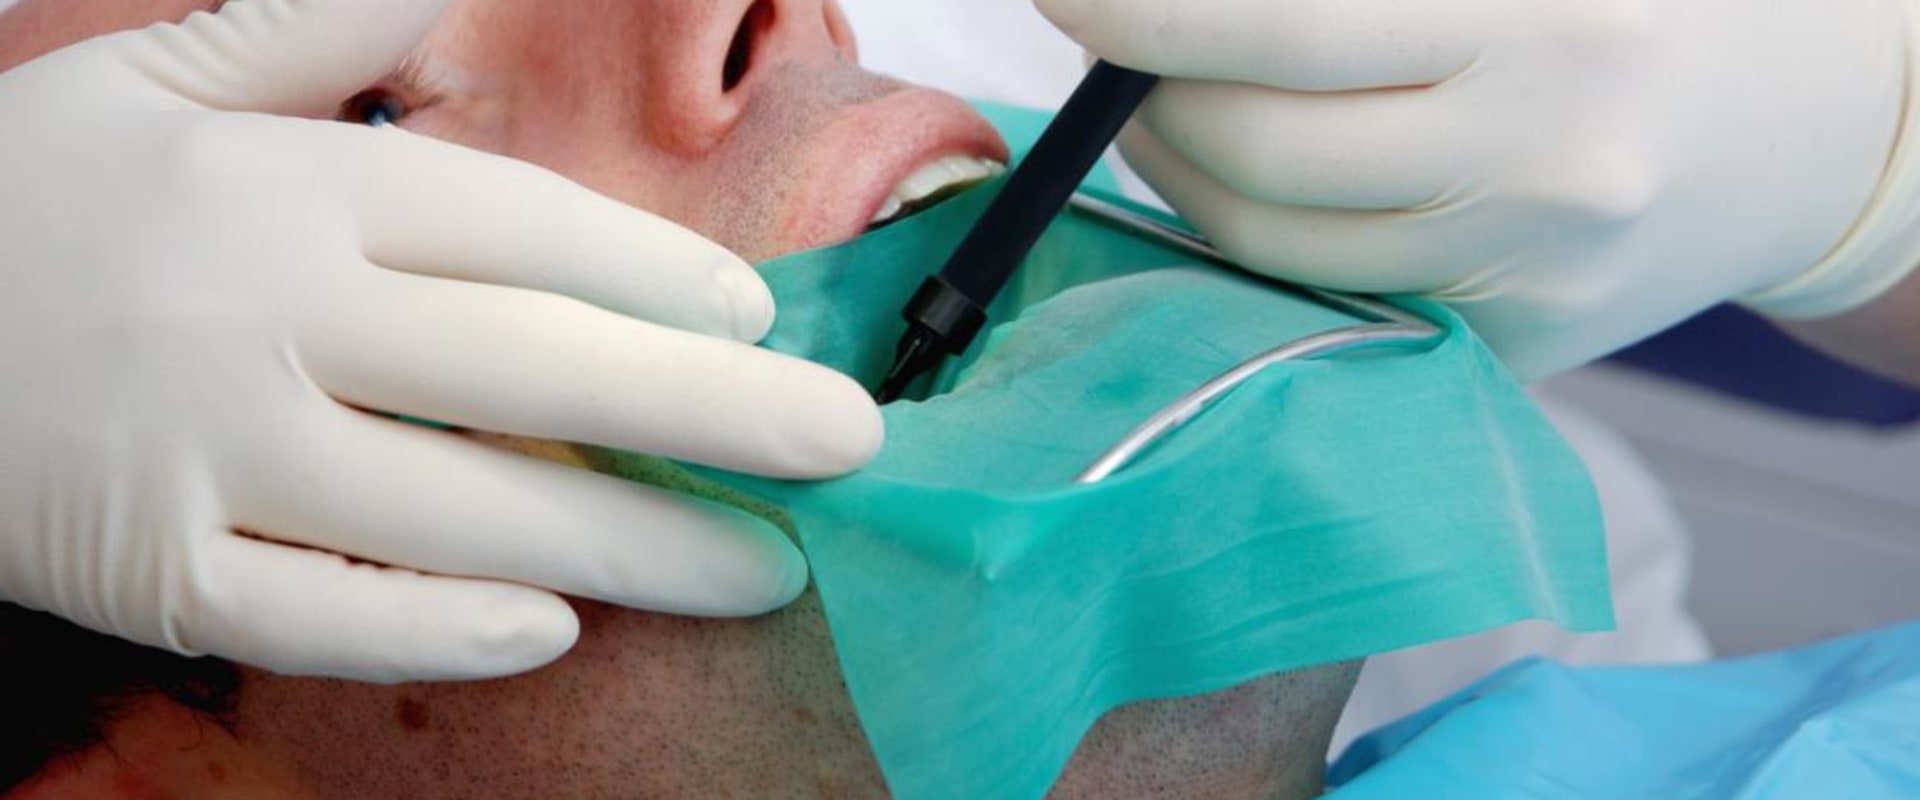 What Does an Endodontist Do During a Root Canal Treatment?